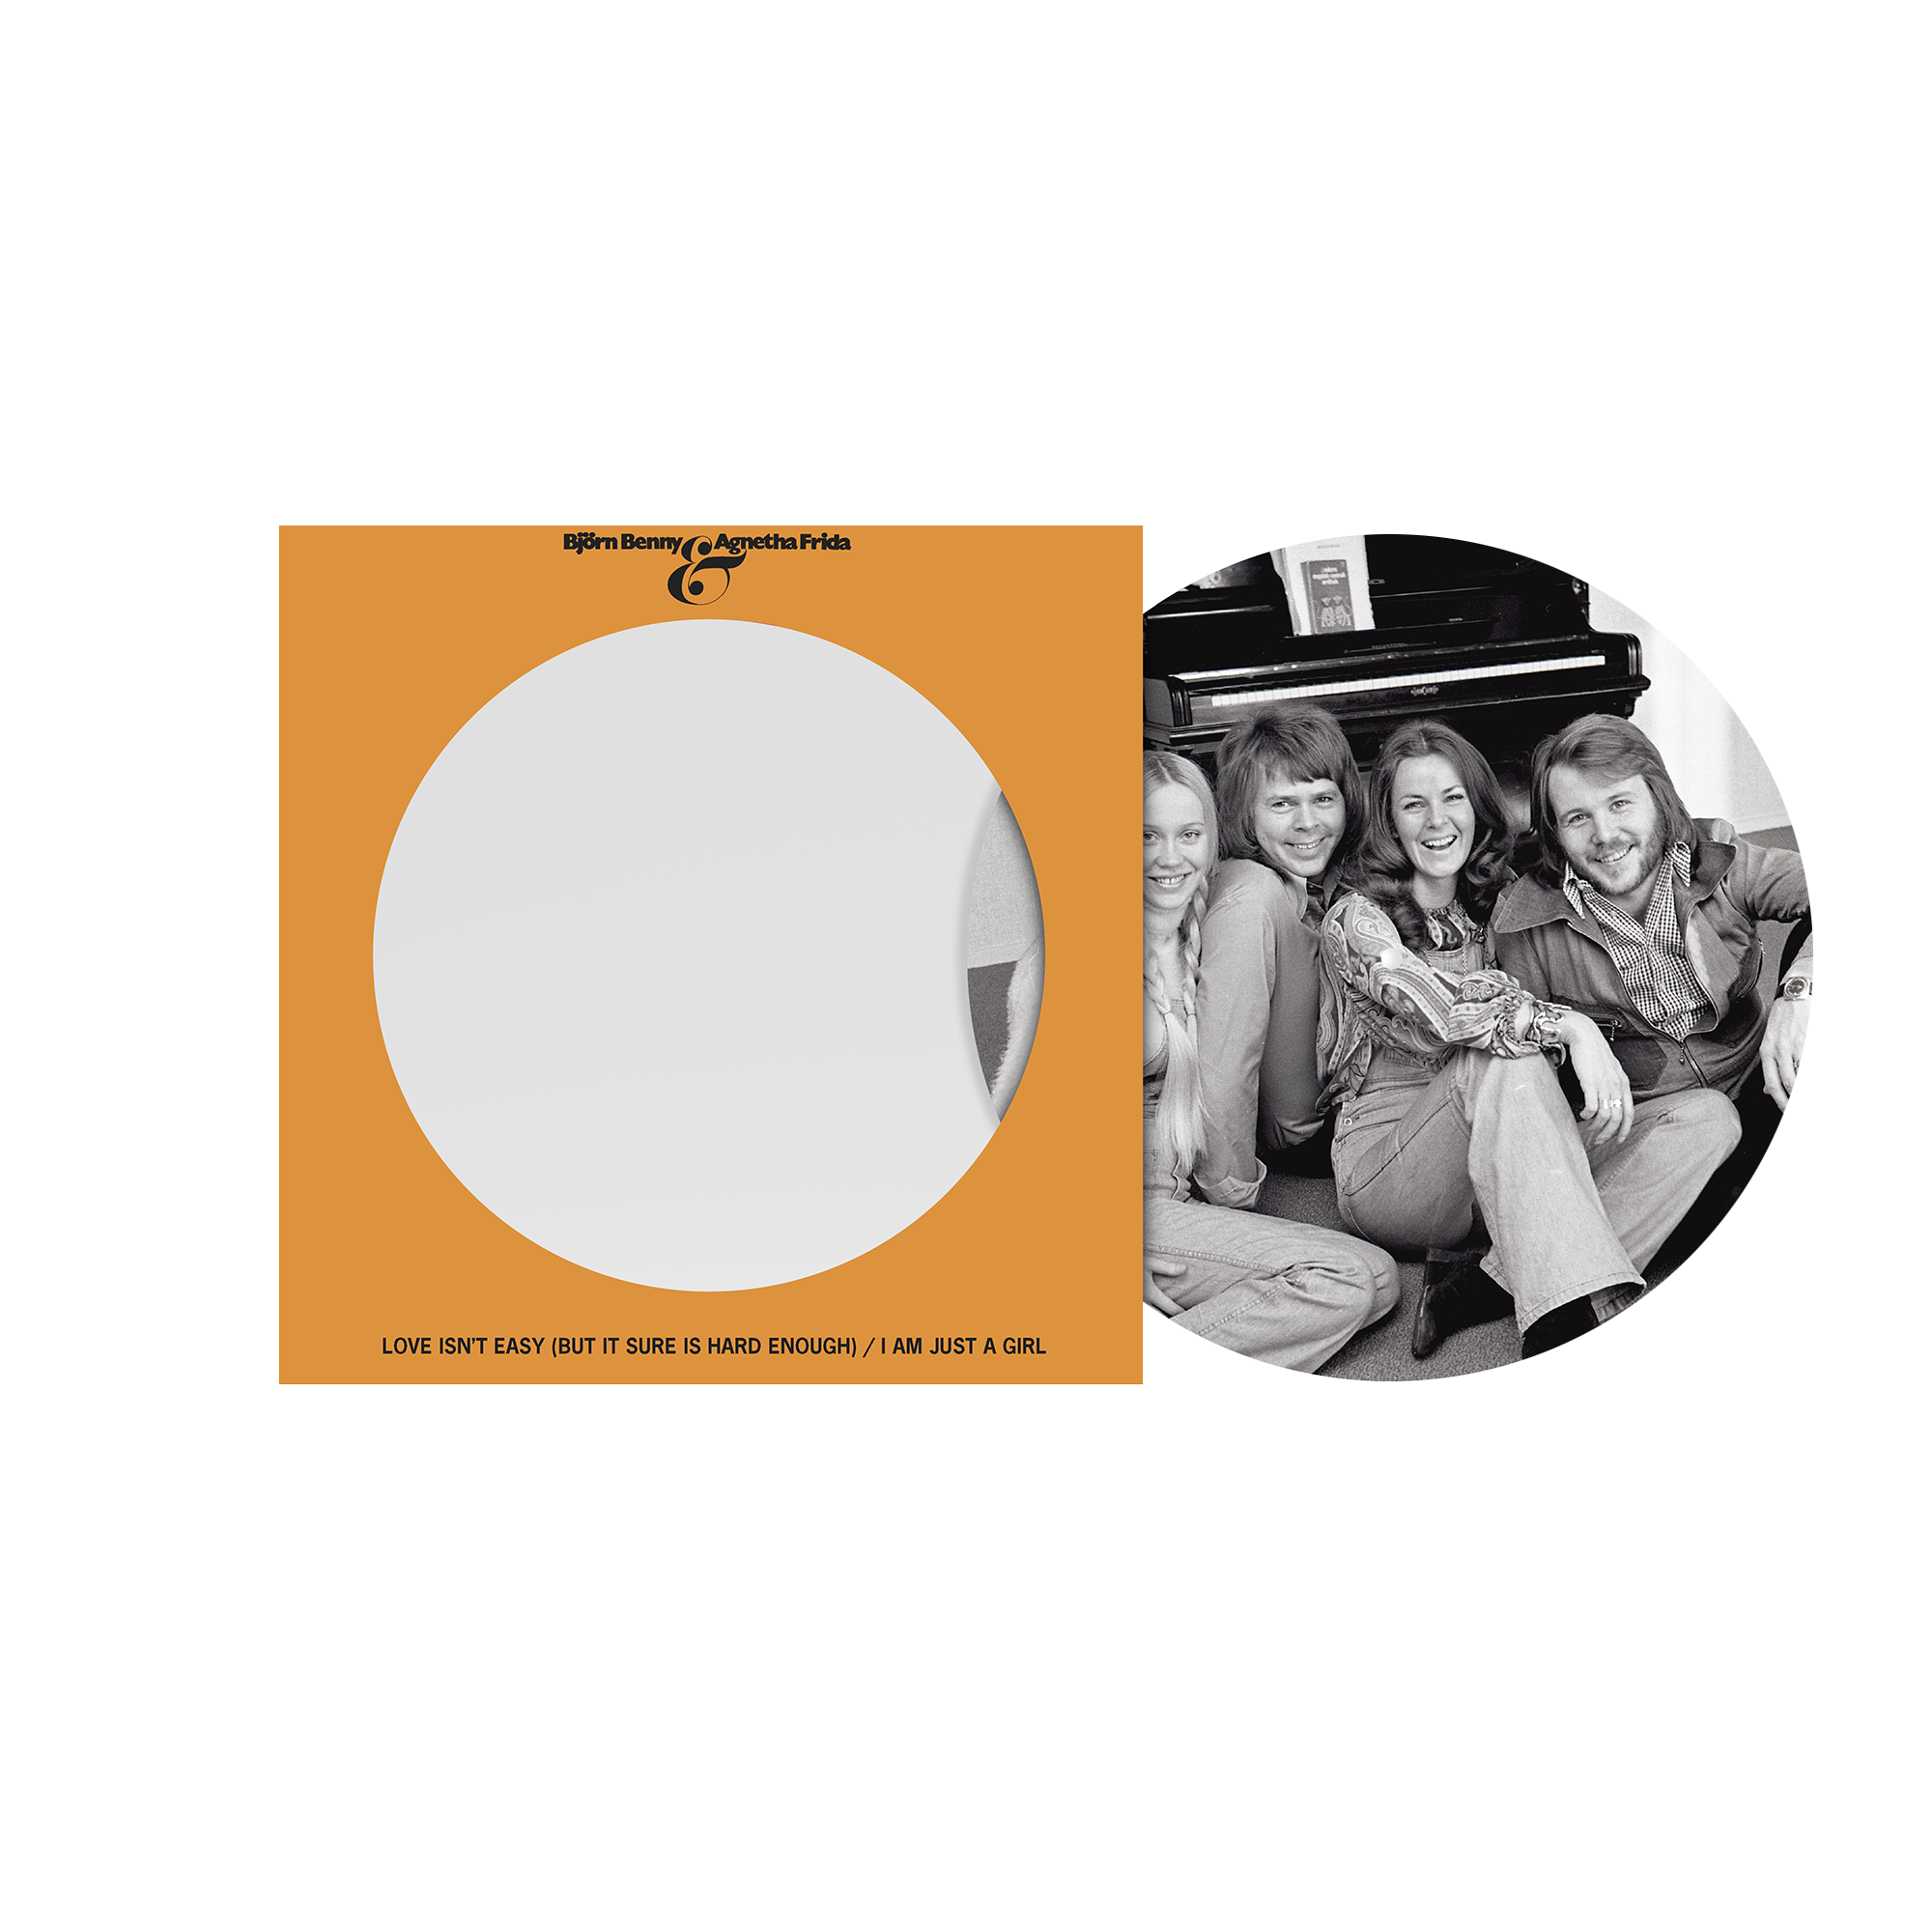 Love Isn’t Easy (But It Sure Is Hard Enough) / I Am Just A Girl 7″ Picture Disc Single (Limited Edition)